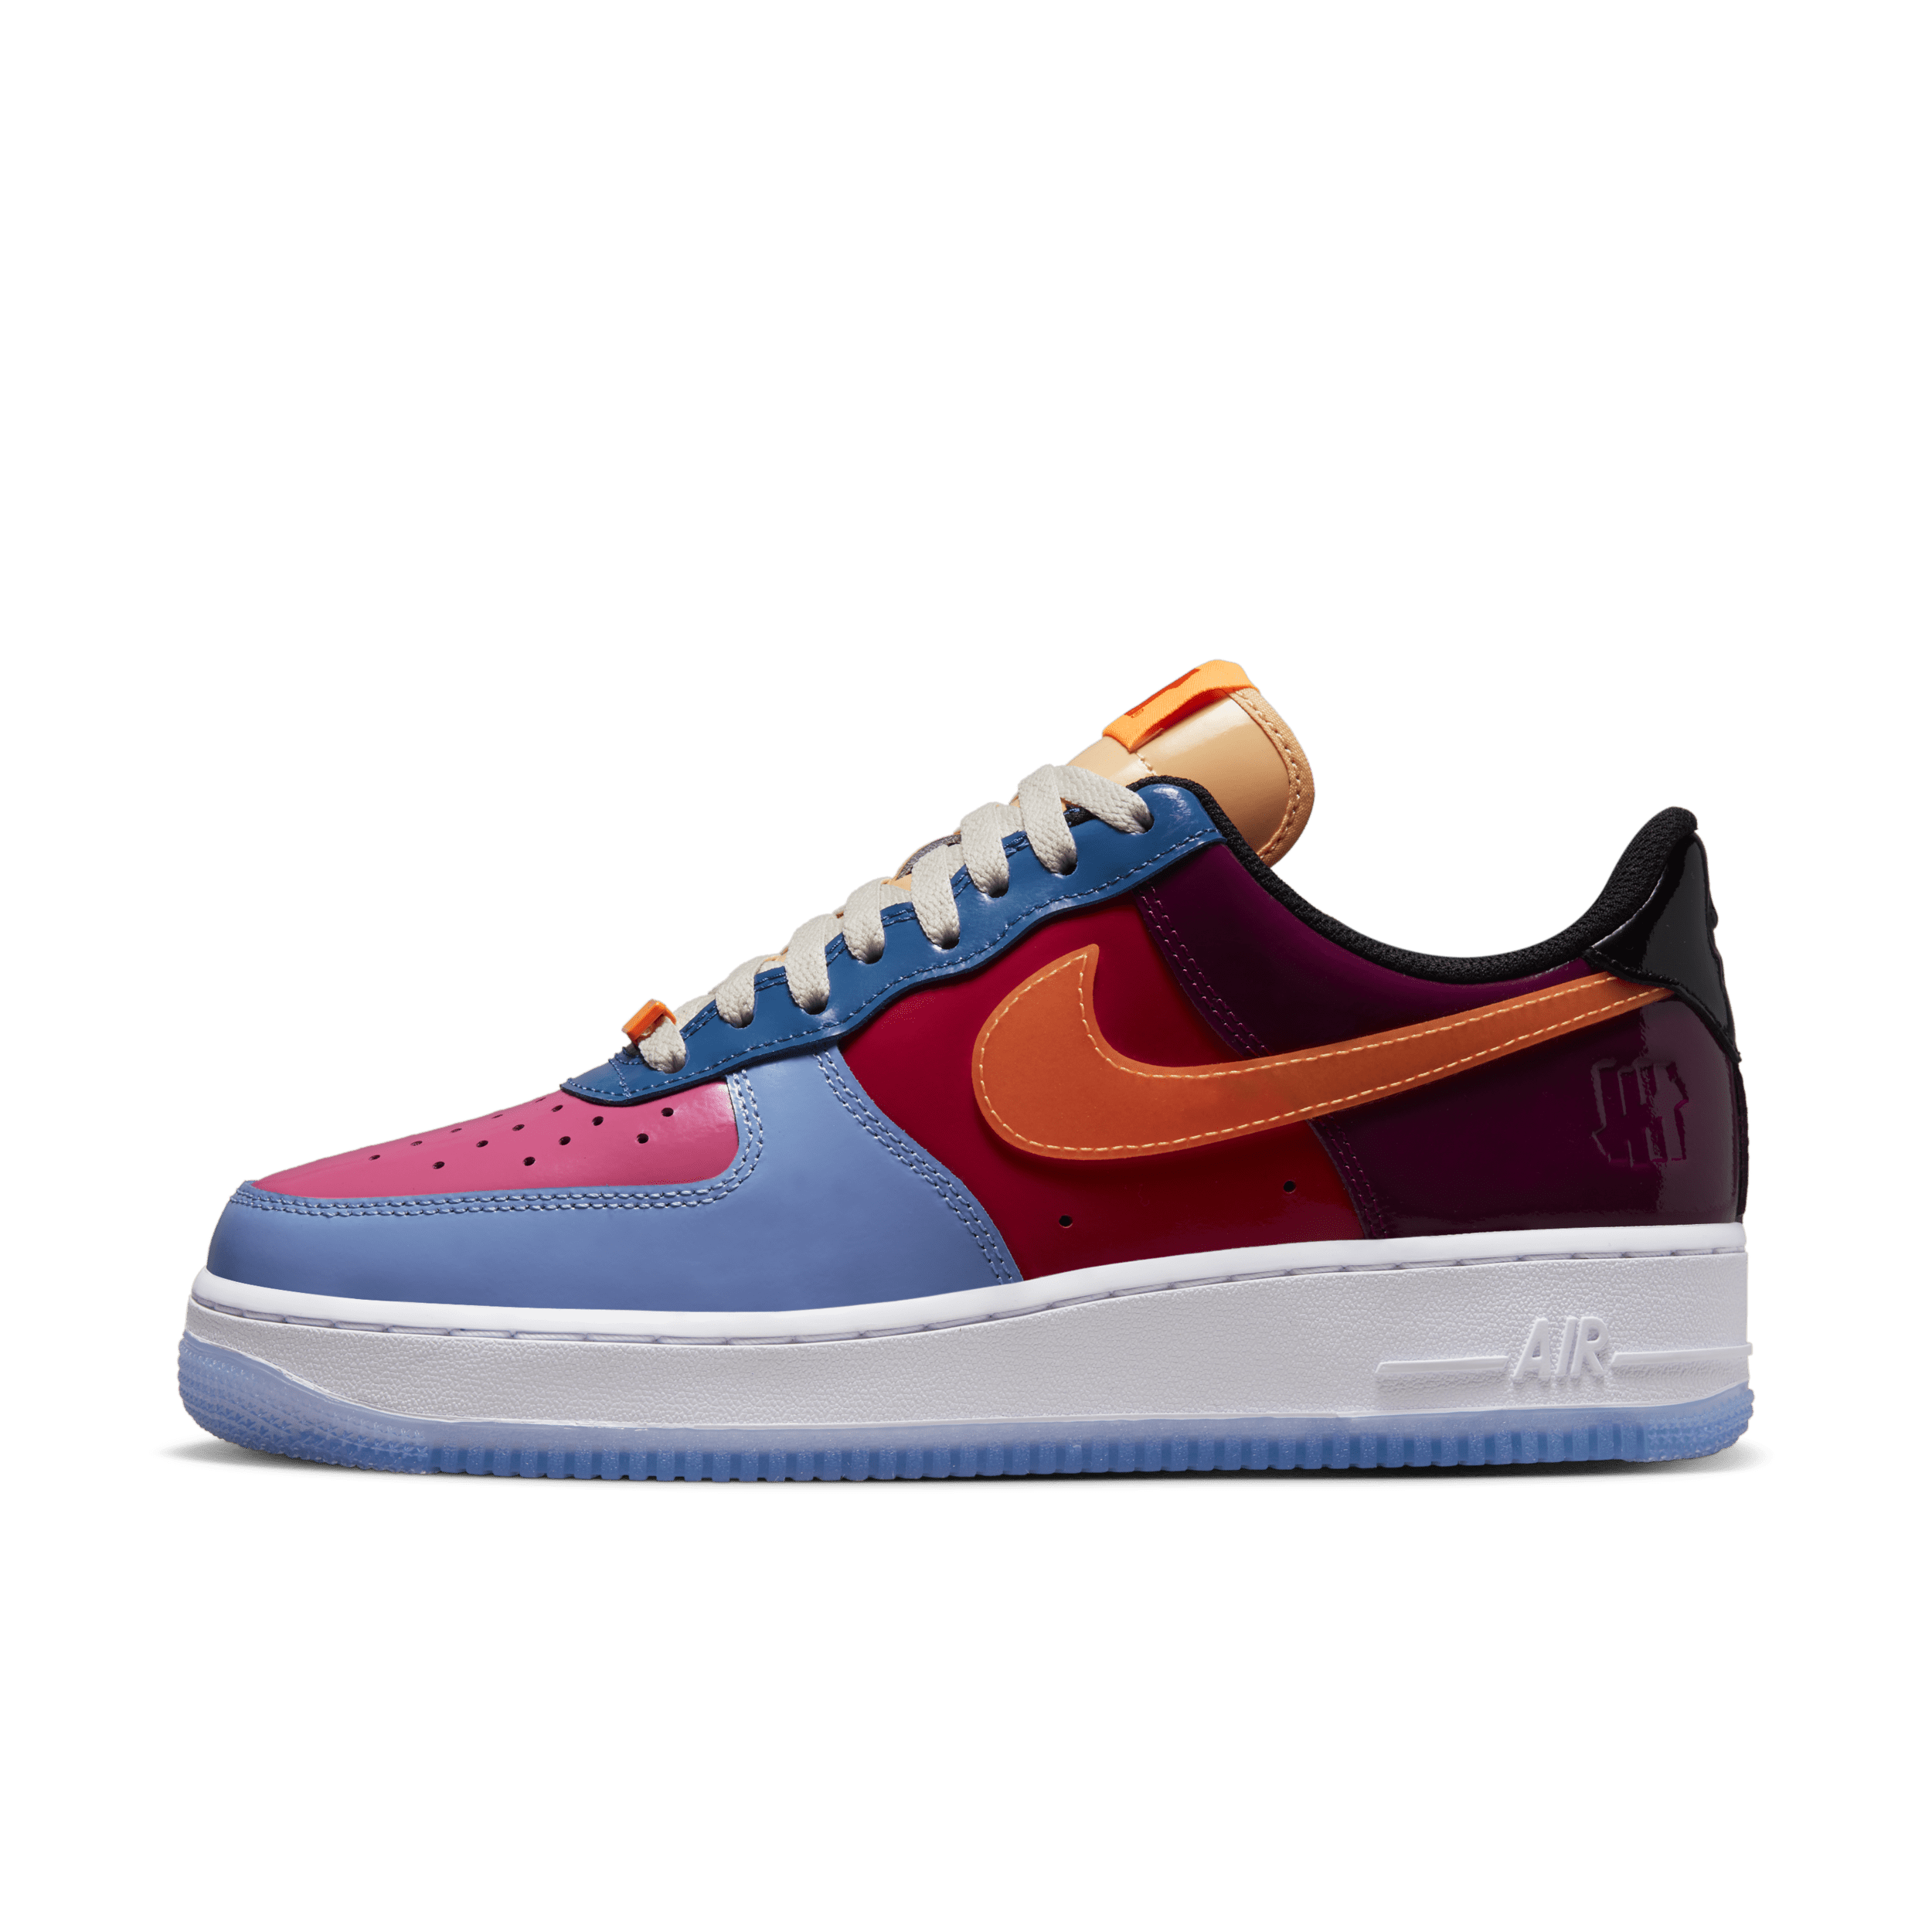 Nike Air Force 1 Low x UNDEFEATED Herenschoenen - Blauw